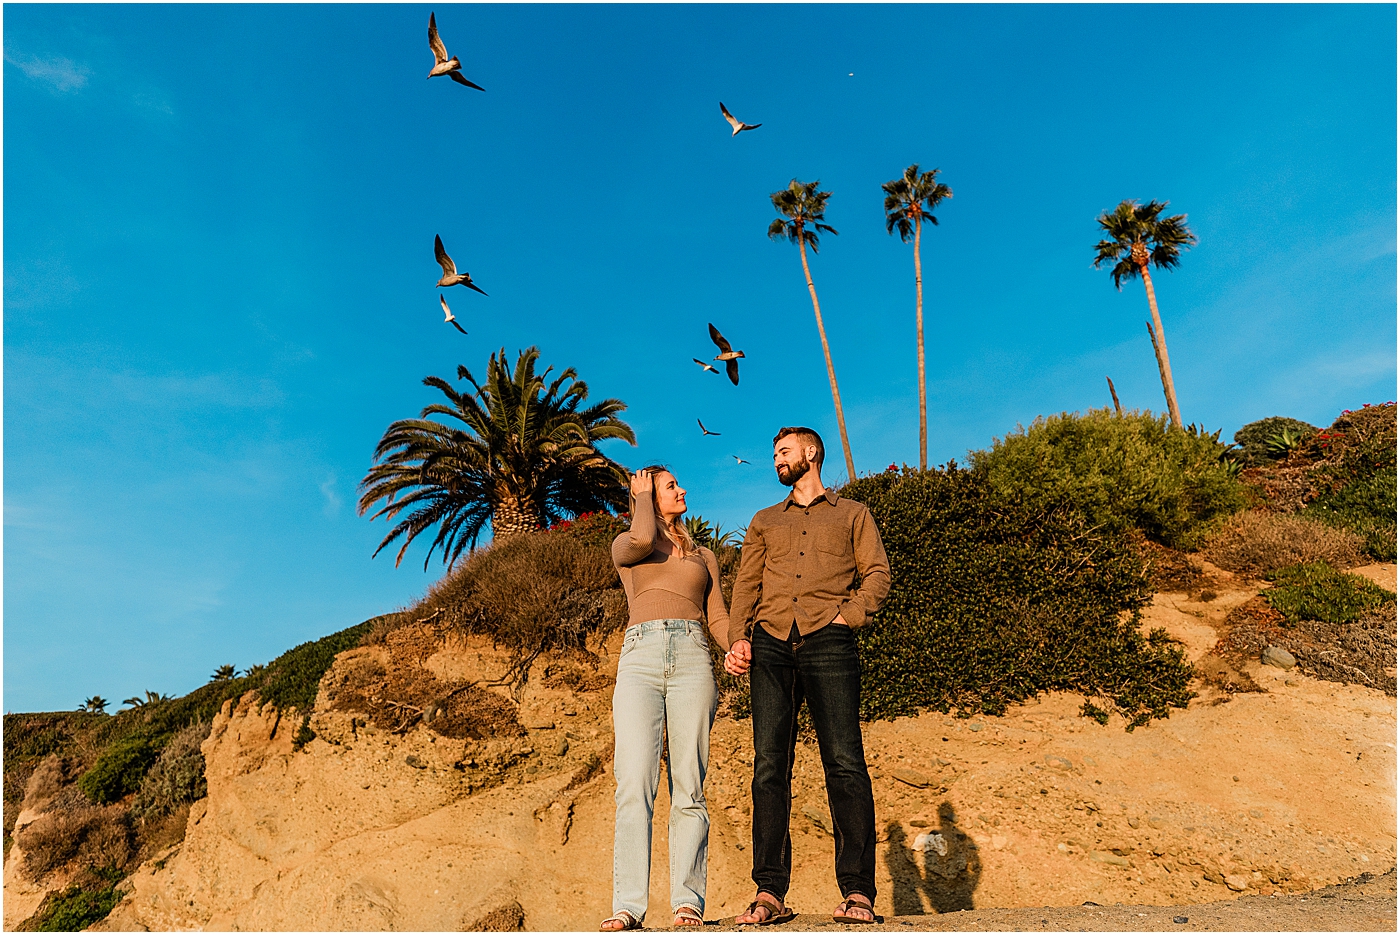 Laguna beach couples photography at Treasure Island Park. Couple holding hands on rocks in front of palm trees and seagulls flying.